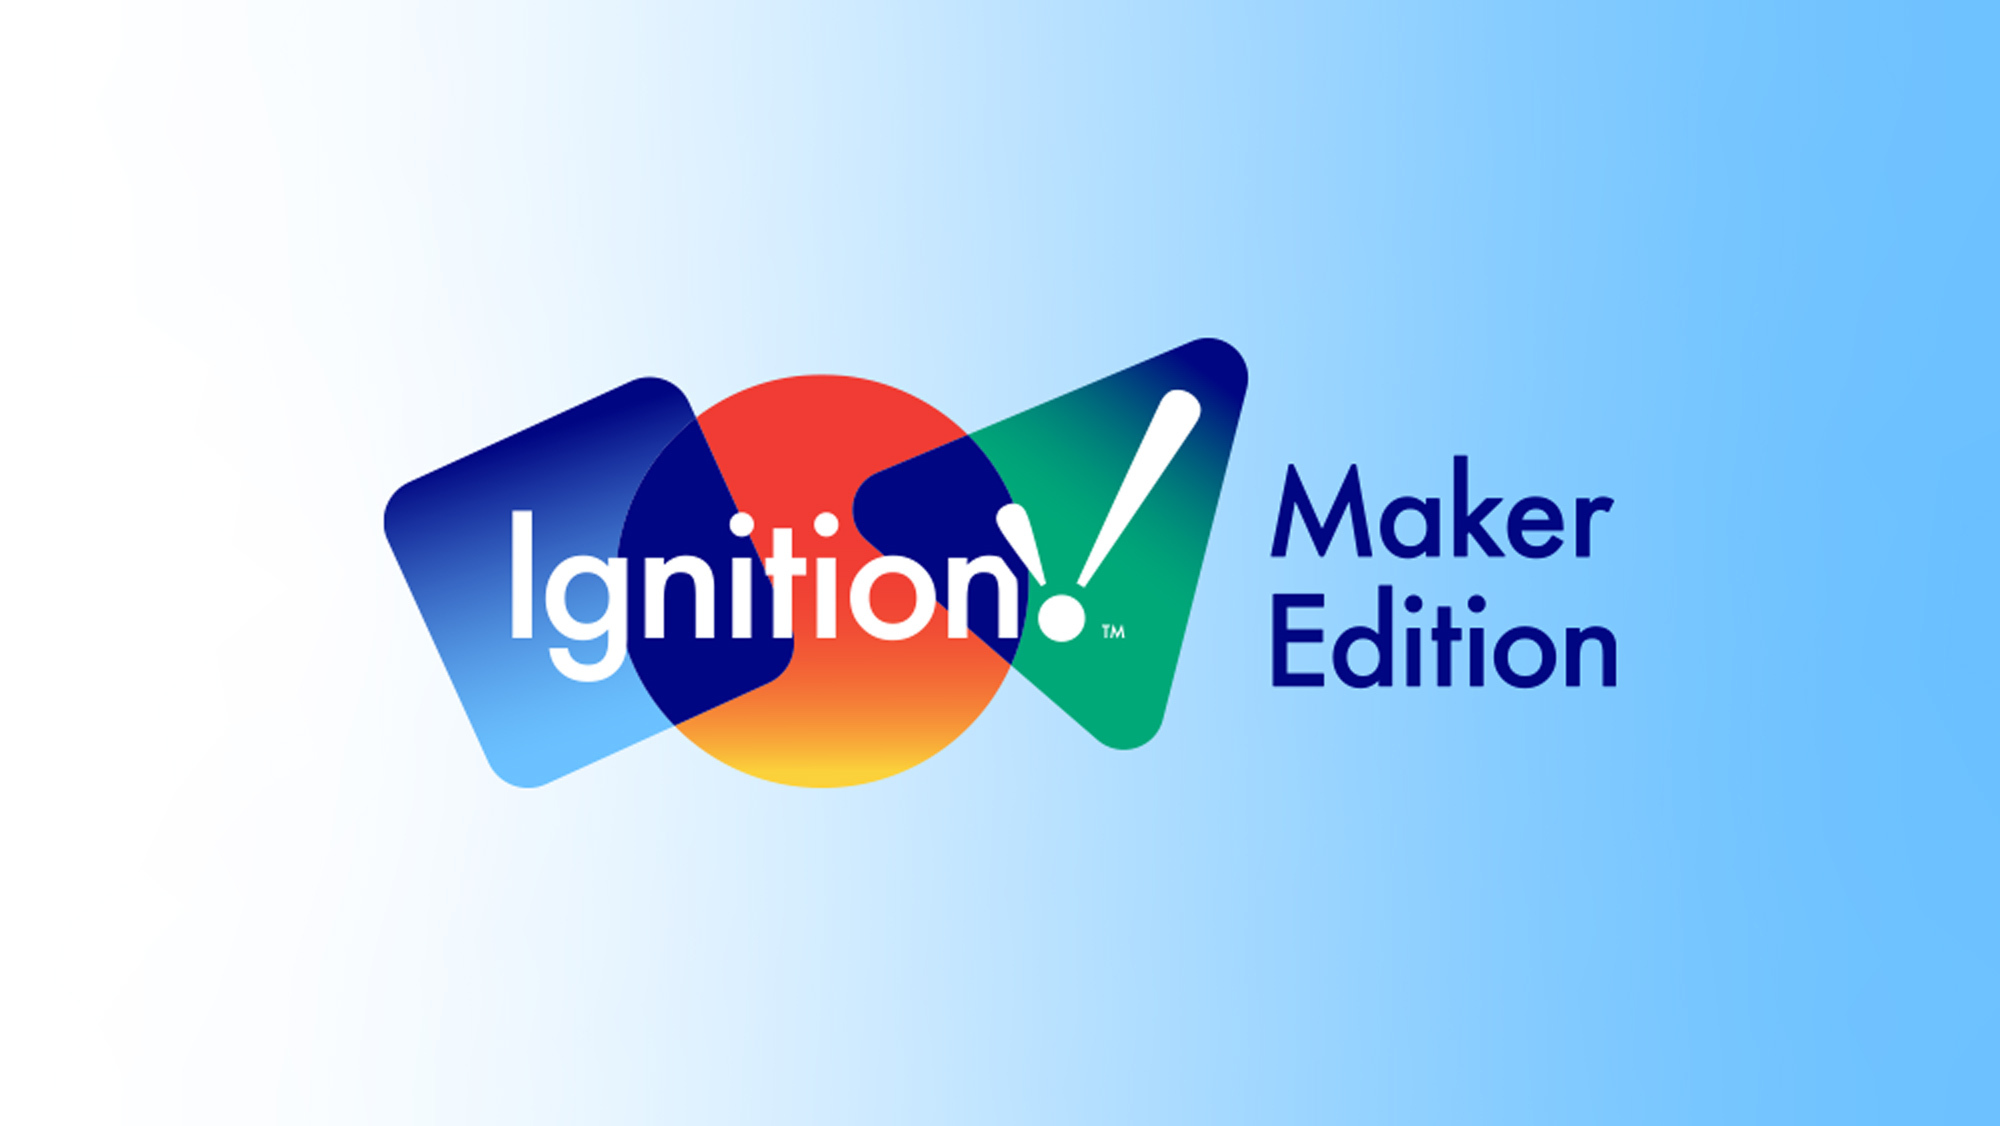 Bring Innovation Home with Ignition Maker Edition